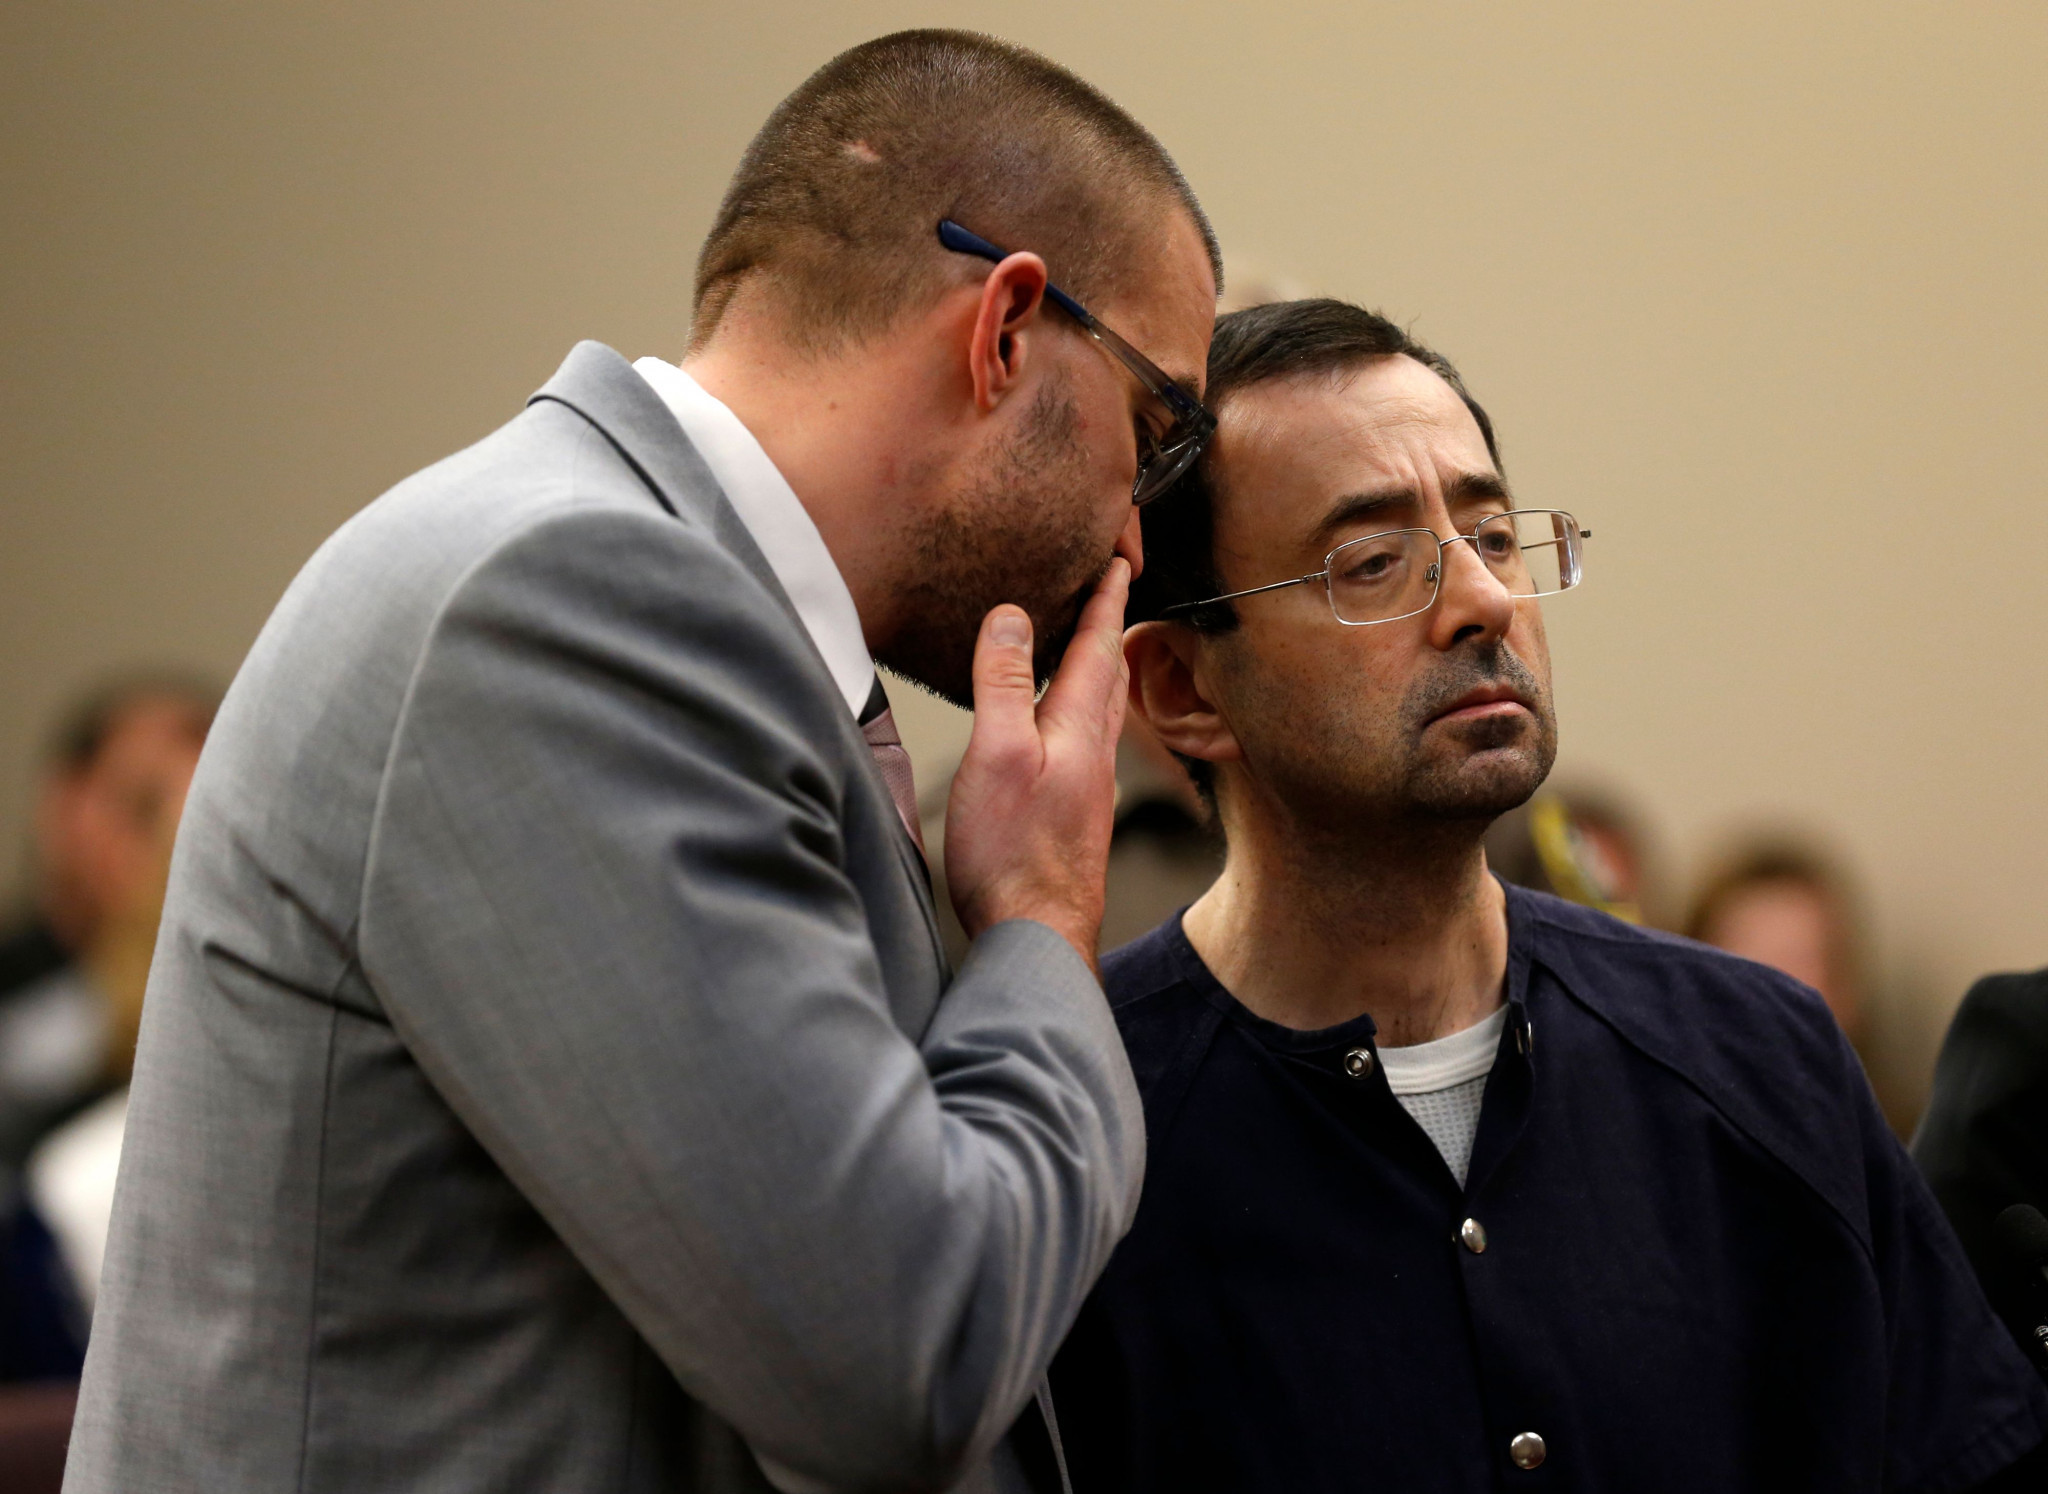 Gymnasts and other victims were critical of USA Gymnastics and the USOC for allowing Larry Nassar to sexually abuse athletes for so long ©Getty Images